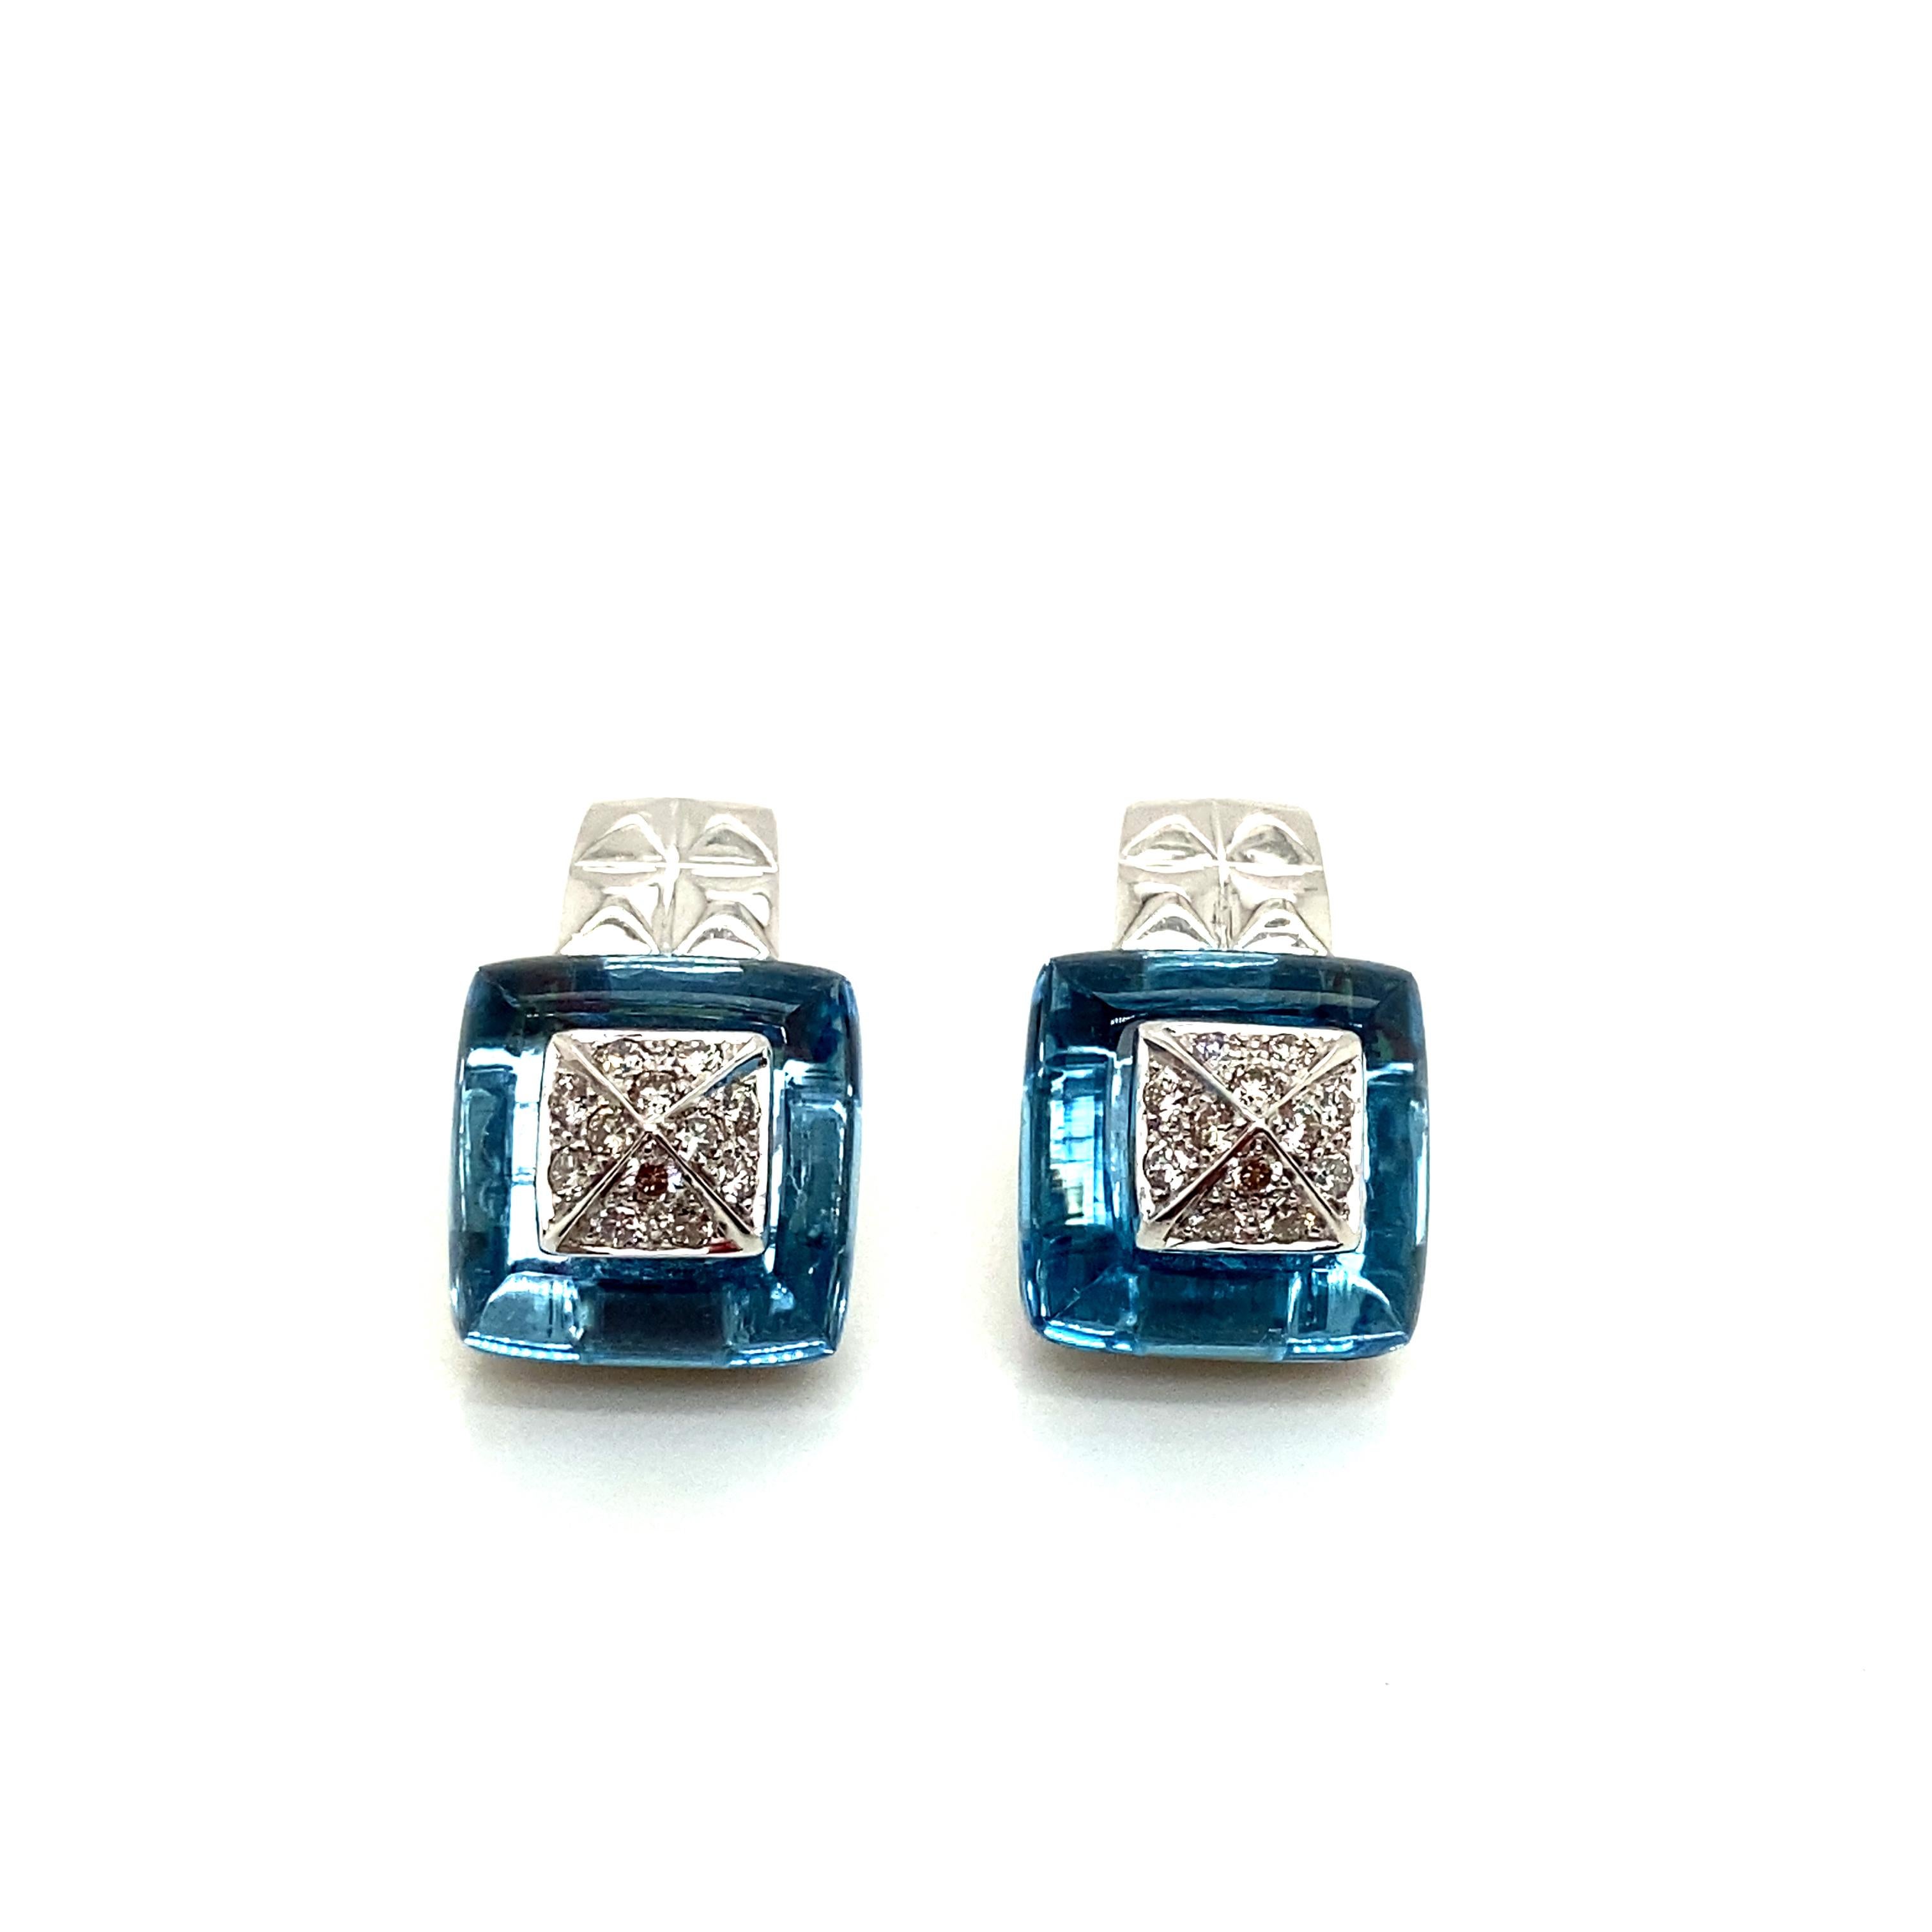 16.95 Carat Blue Topaz and White Diamond Gold Earrings:

A beautiful pair of earrings, it features two fancy-cut sugarloaf-shaped blue topaz weighing 16.95 carat with a cluster of white round brilliant-cut diamonds in the centre of each weighing a